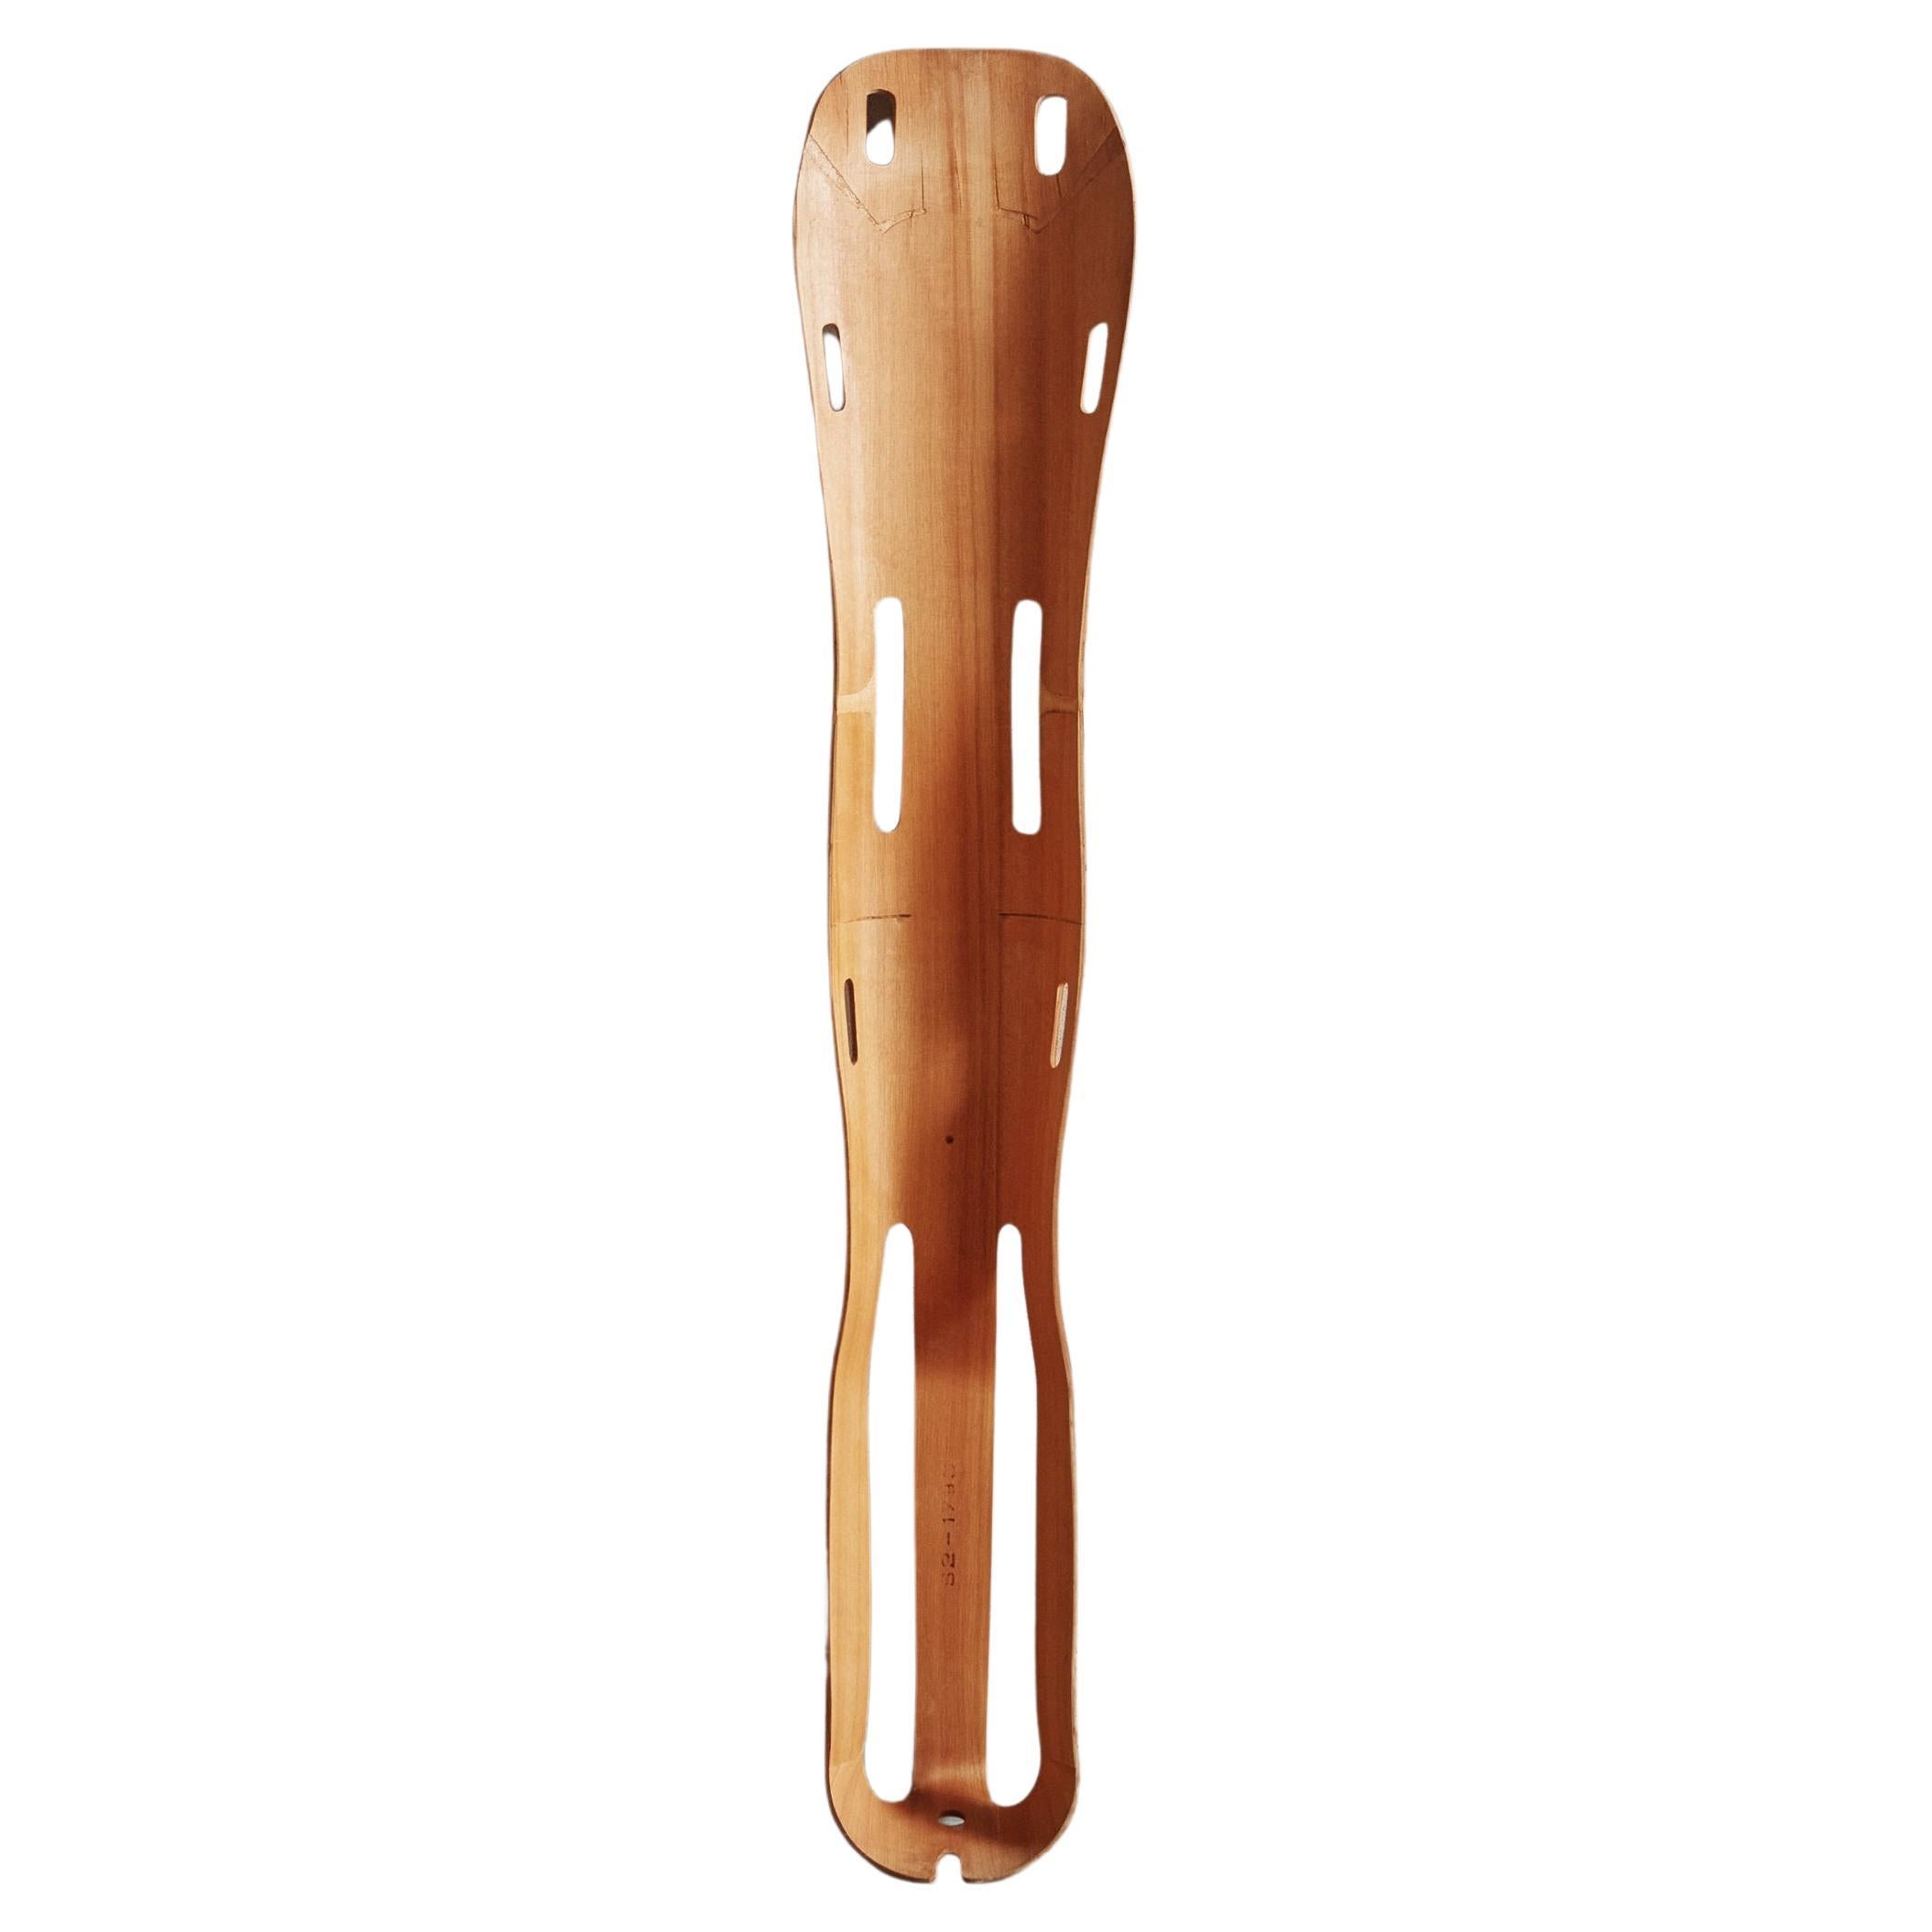 Single Leg Splint by Charles & Ray Eames for Evans Products Company, 1940s